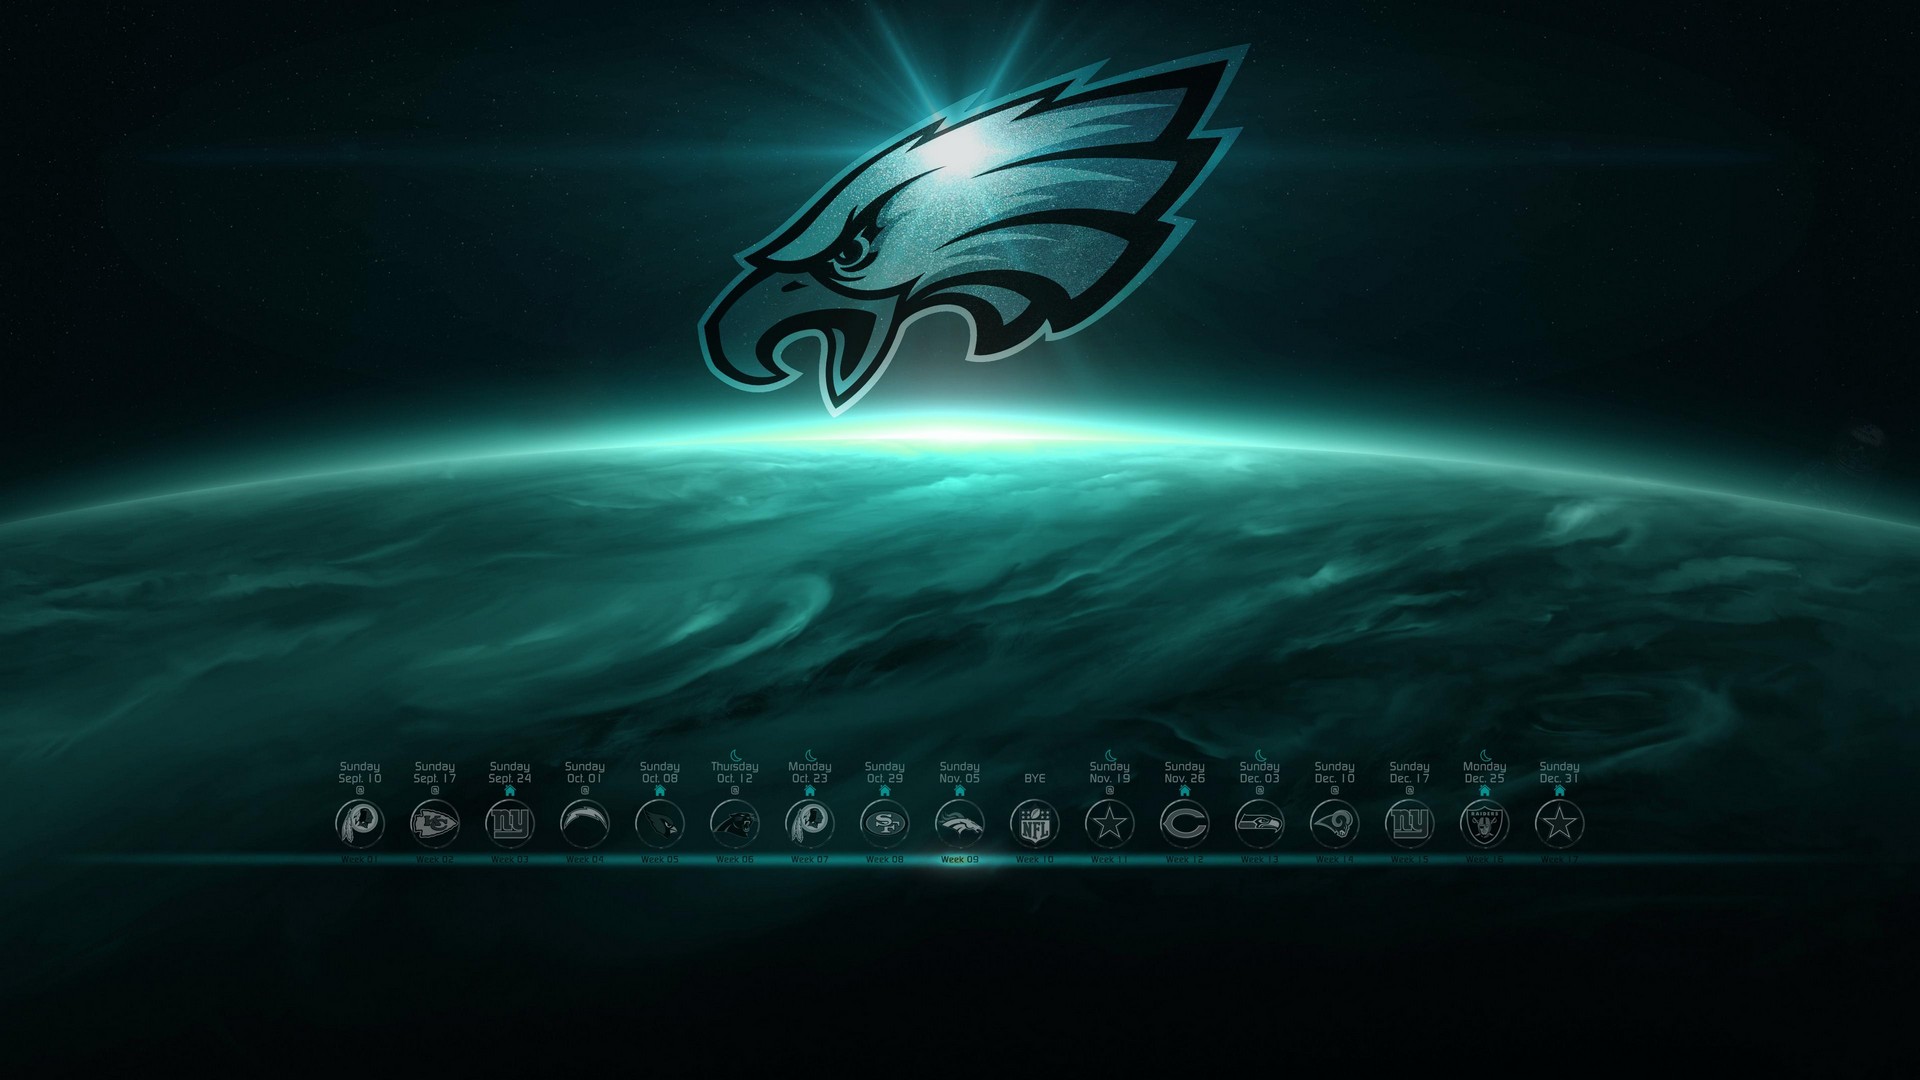 NFL Eagles Wallpaper For Mac Backgrounds with resolution 1920x1080 pixel. You can make this wallpaper for your Mac or Windows Desktop Background, iPhone, Android or Tablet and another Smartphone device